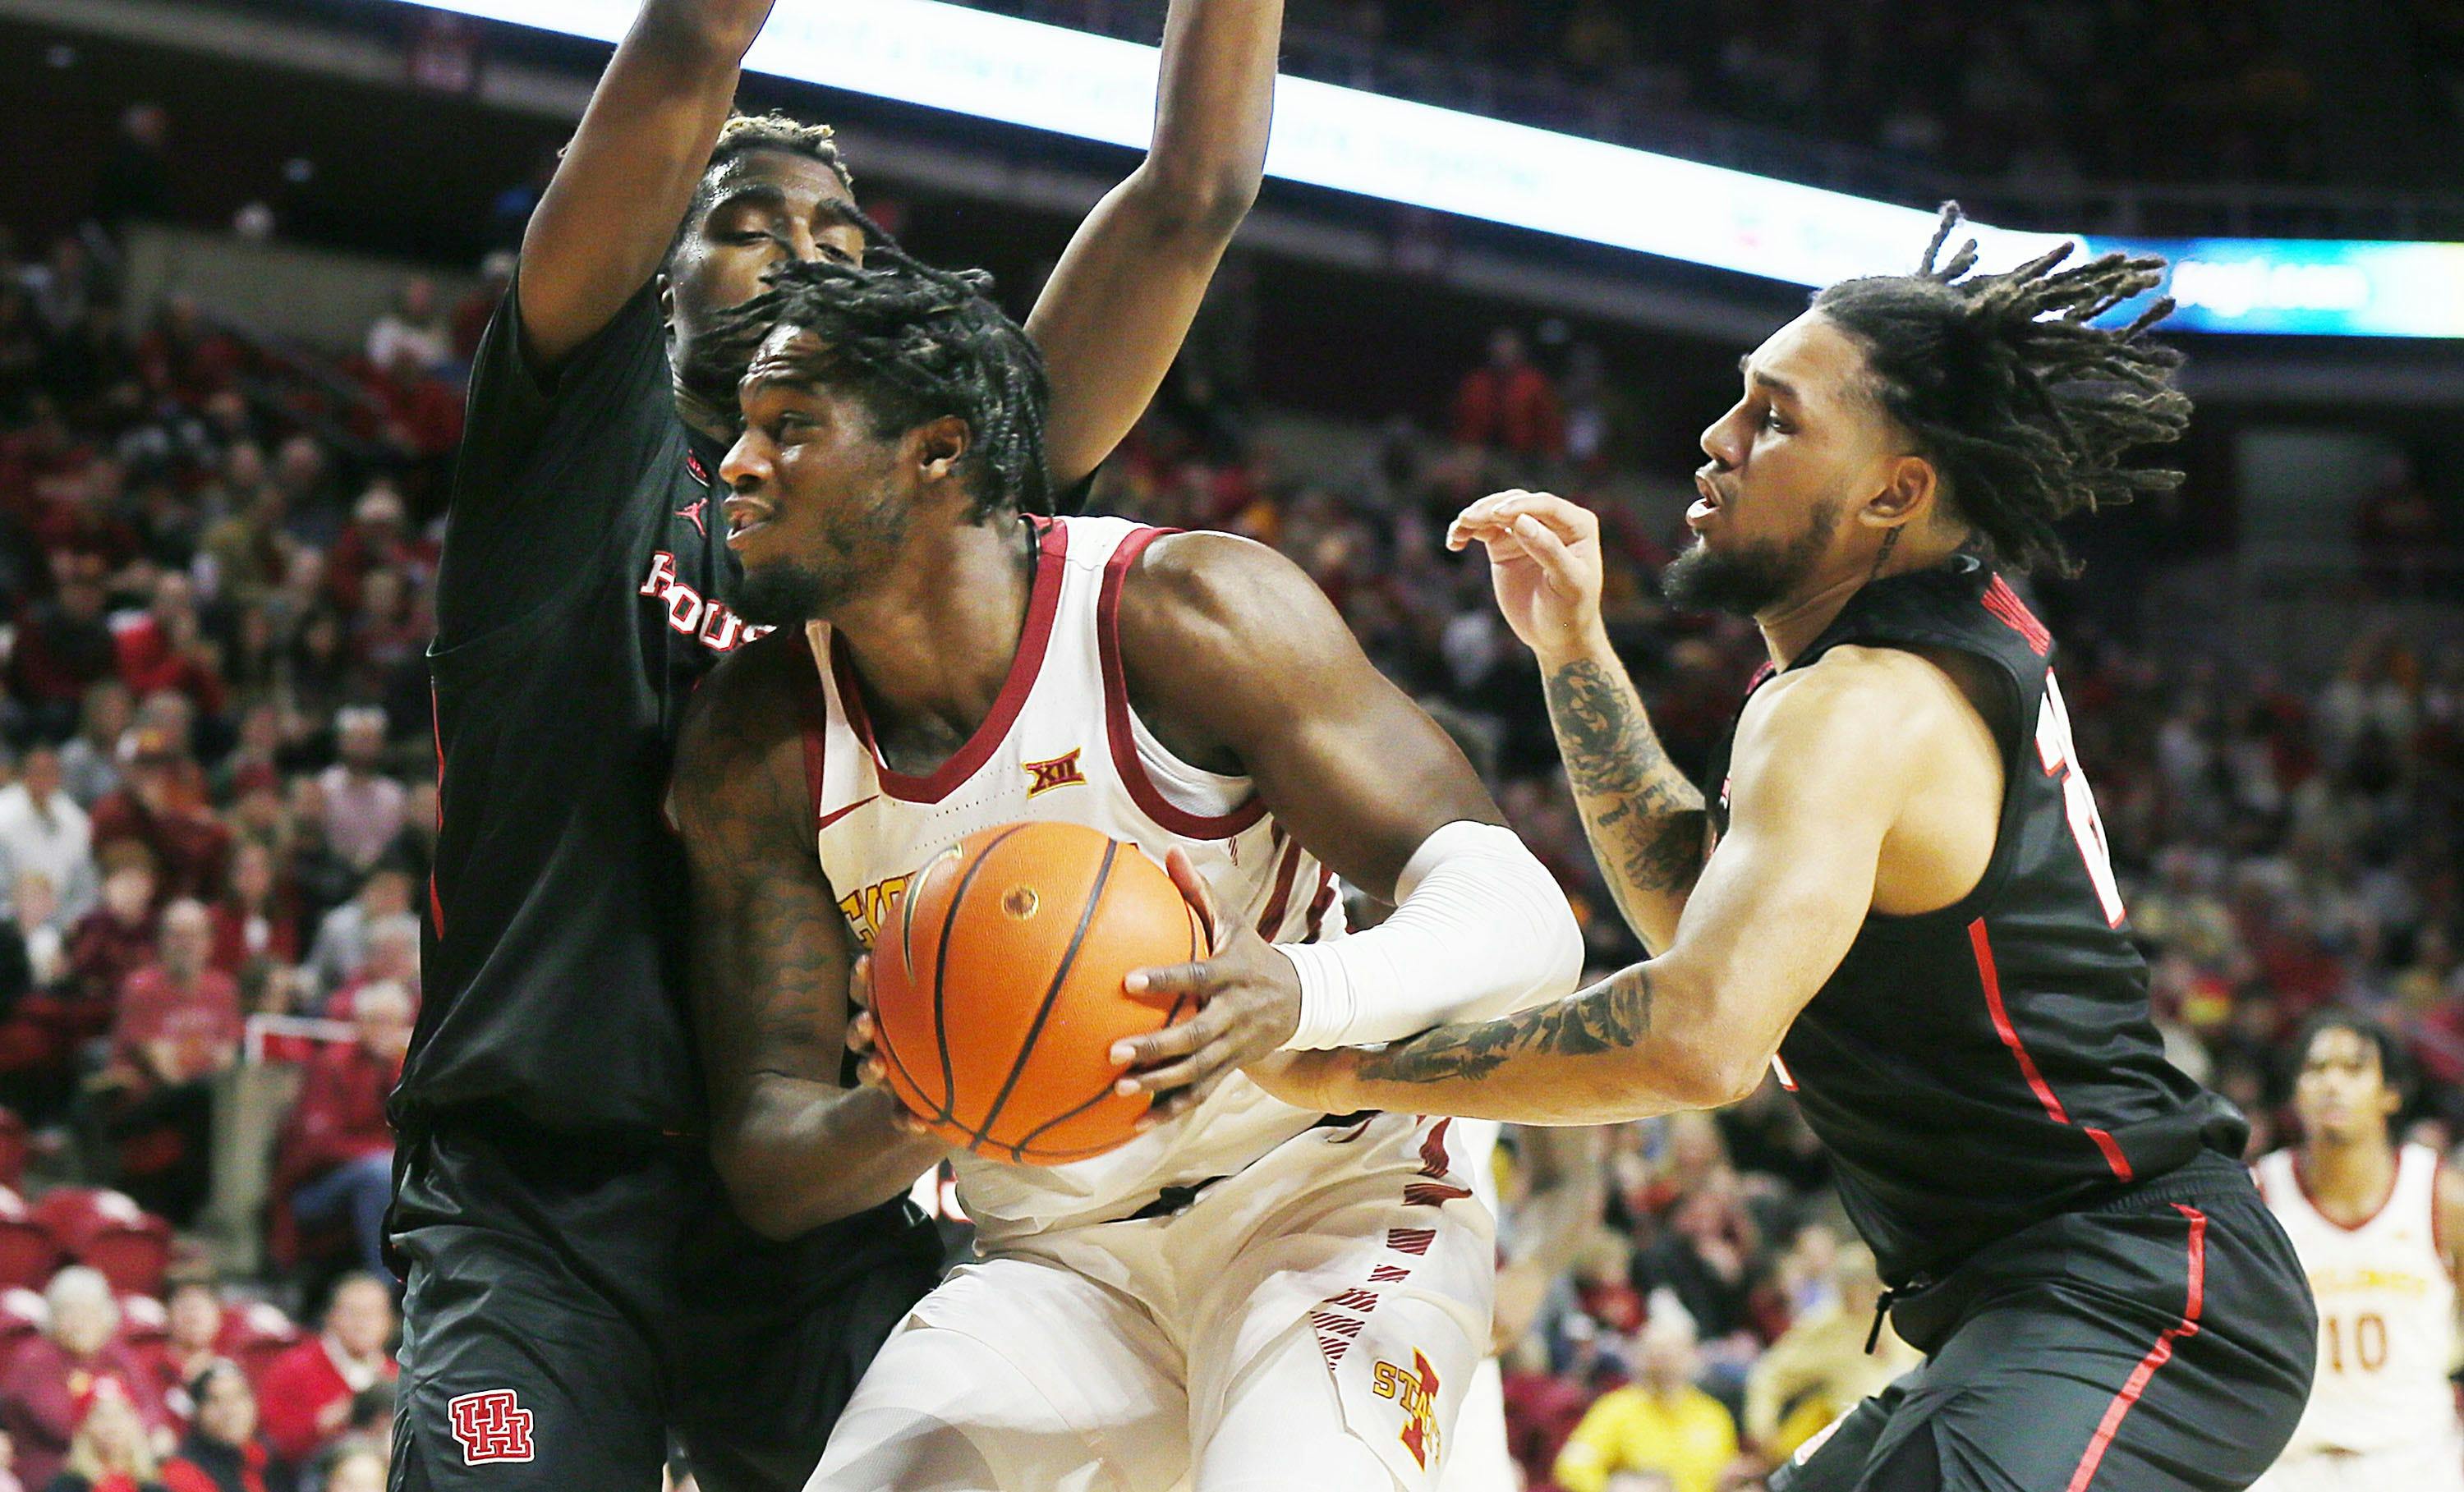 REACTION POD with CW: Don't call it an upset ... Cyclones take down No. 2 Houston